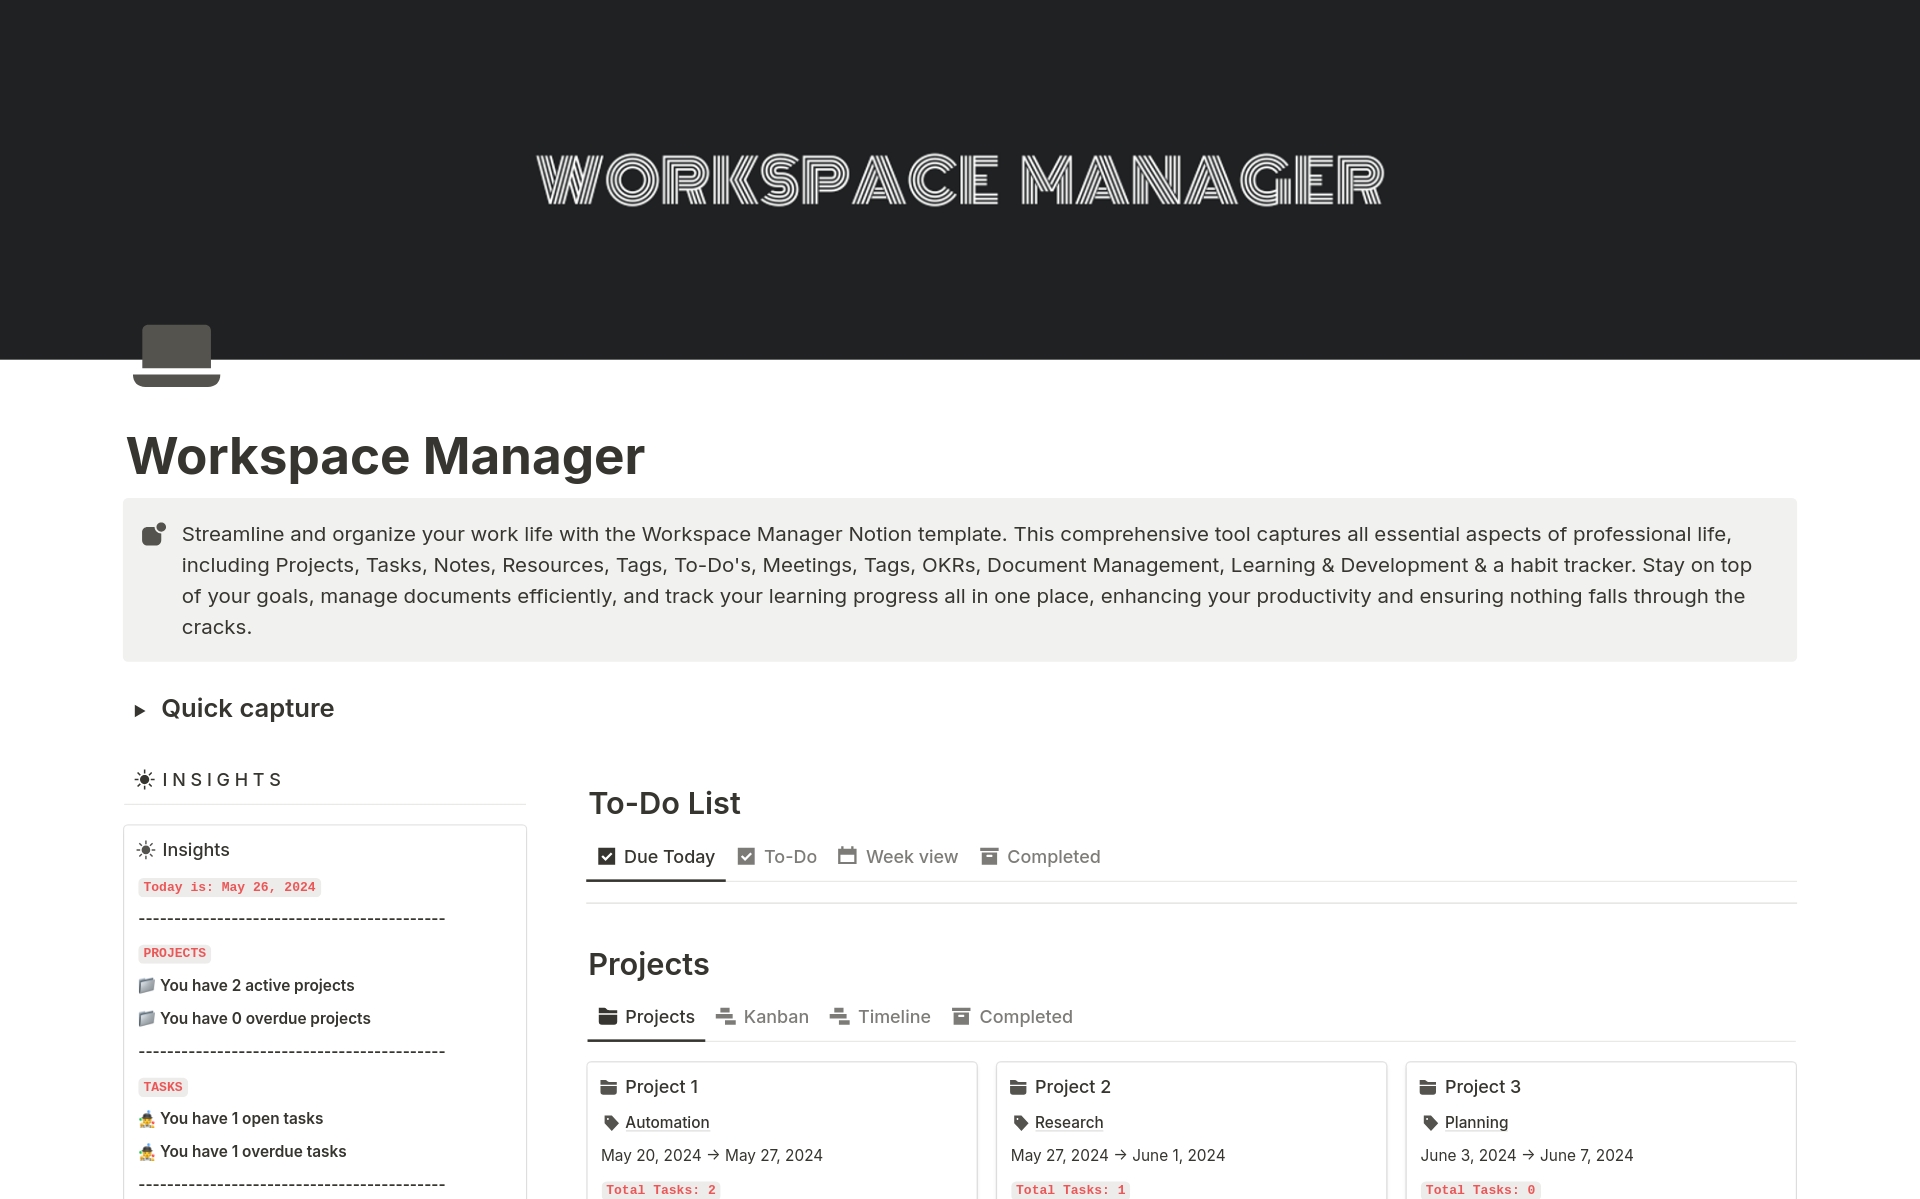 Streamline and organize your work life with the Workspace Manager Notion template. 